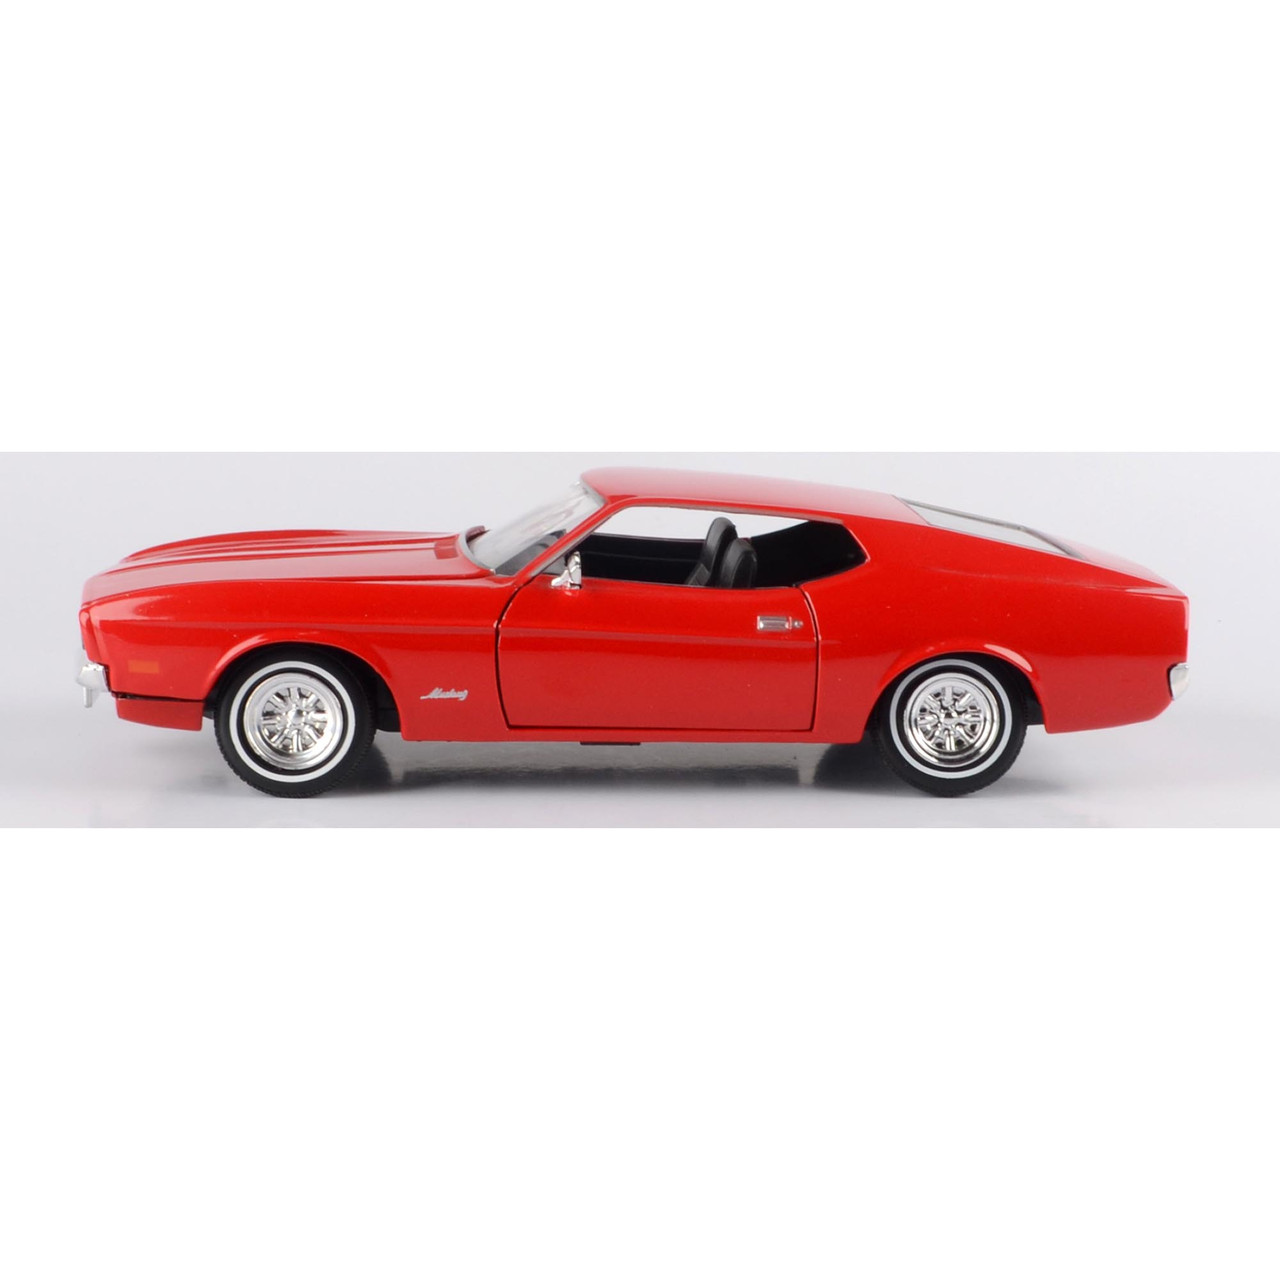 Ford Mustang Sportsroof 1971 Coupe 1:24 Scale Diecast Detailed Model Car in Red 